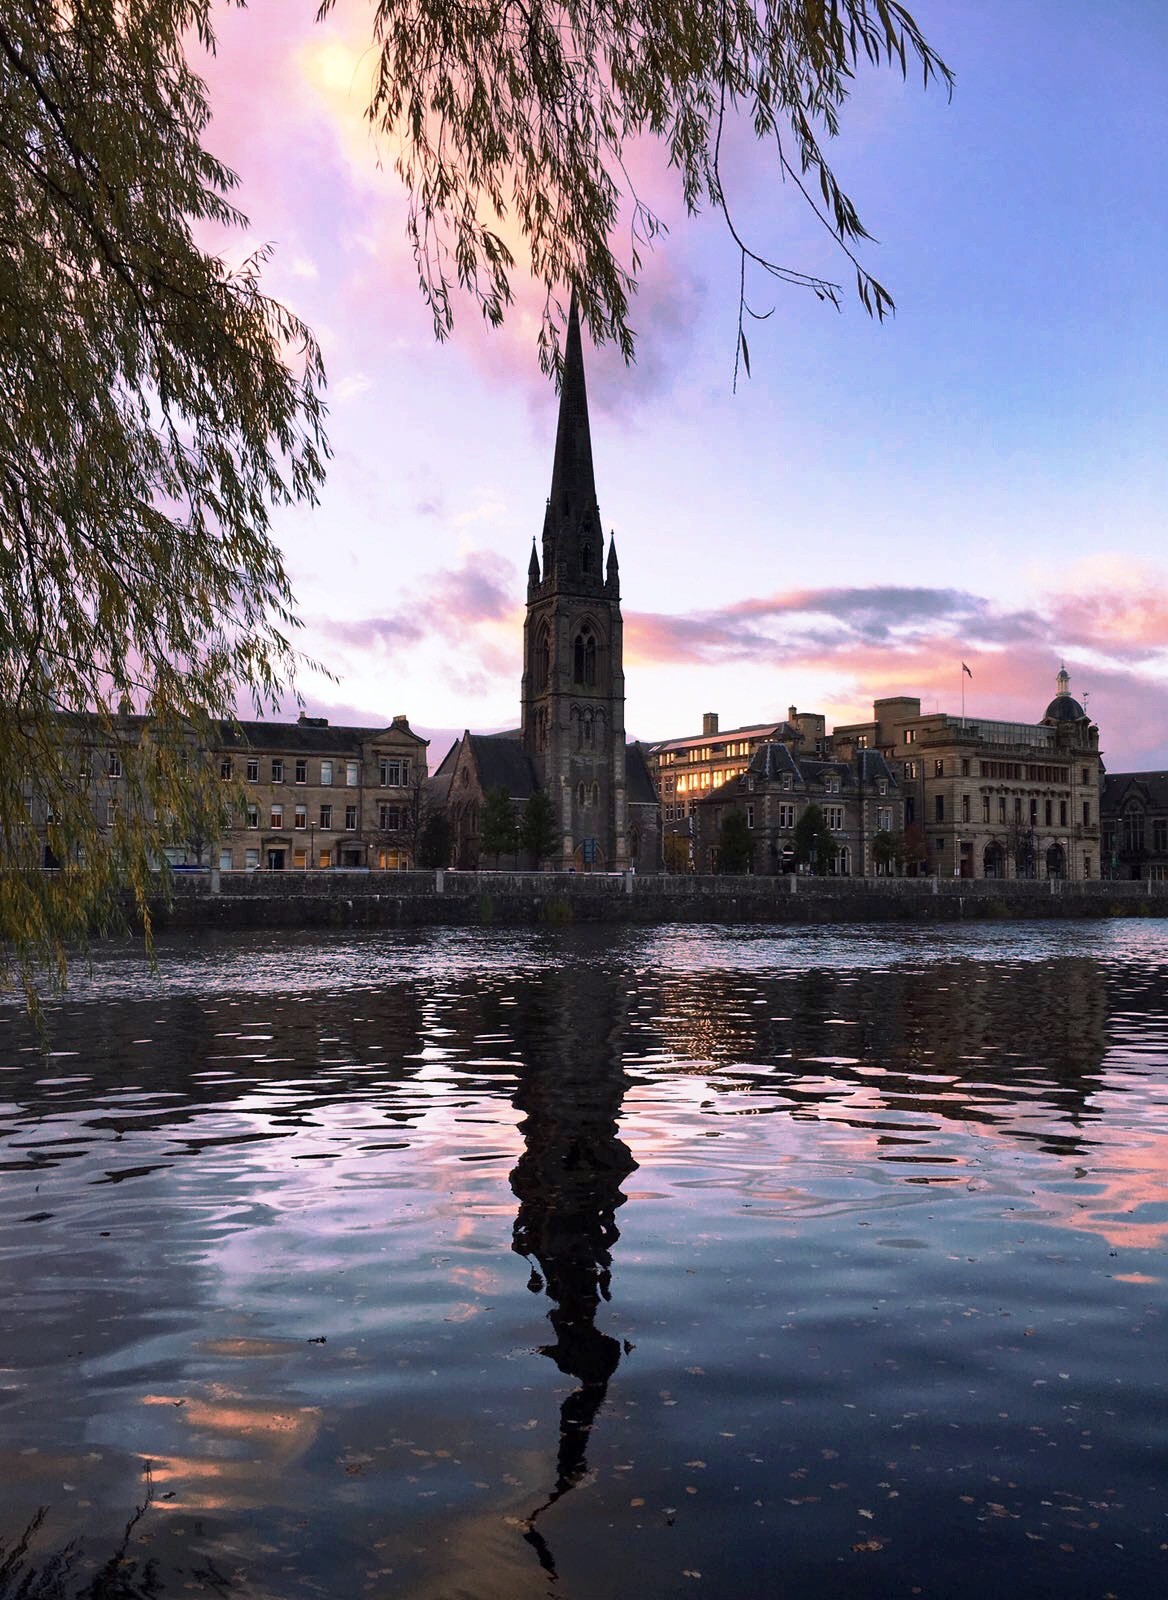 Ian Black took this beautiful picture of St John's kirk on Tay Street reflected in the Tay with the silvery, blue and violet sky in the water.